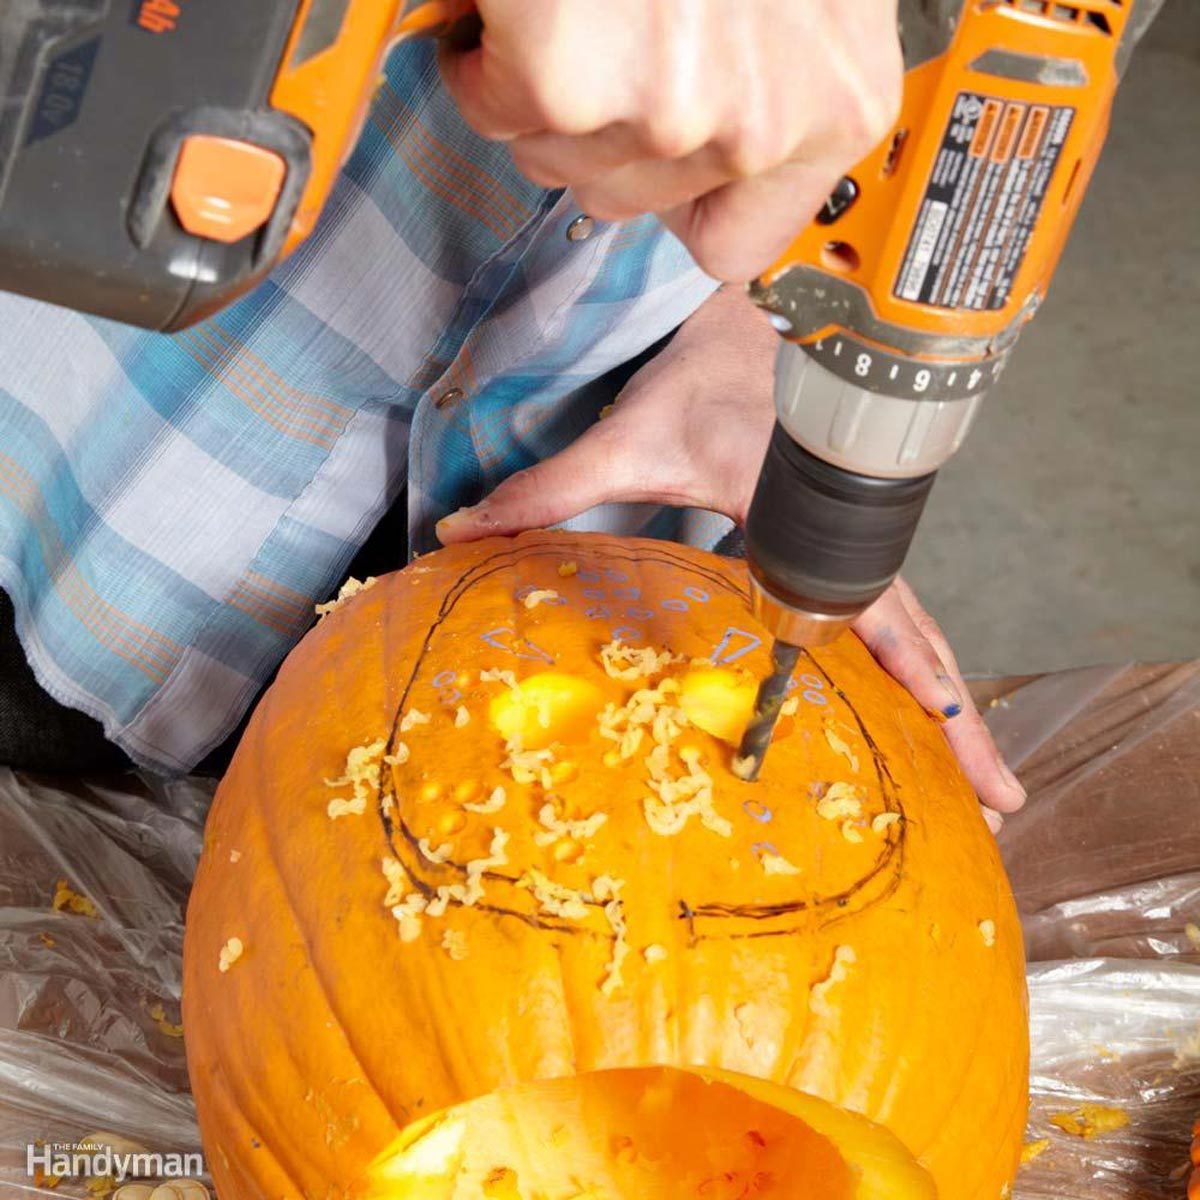 Pumpkin Carving with Power Tools